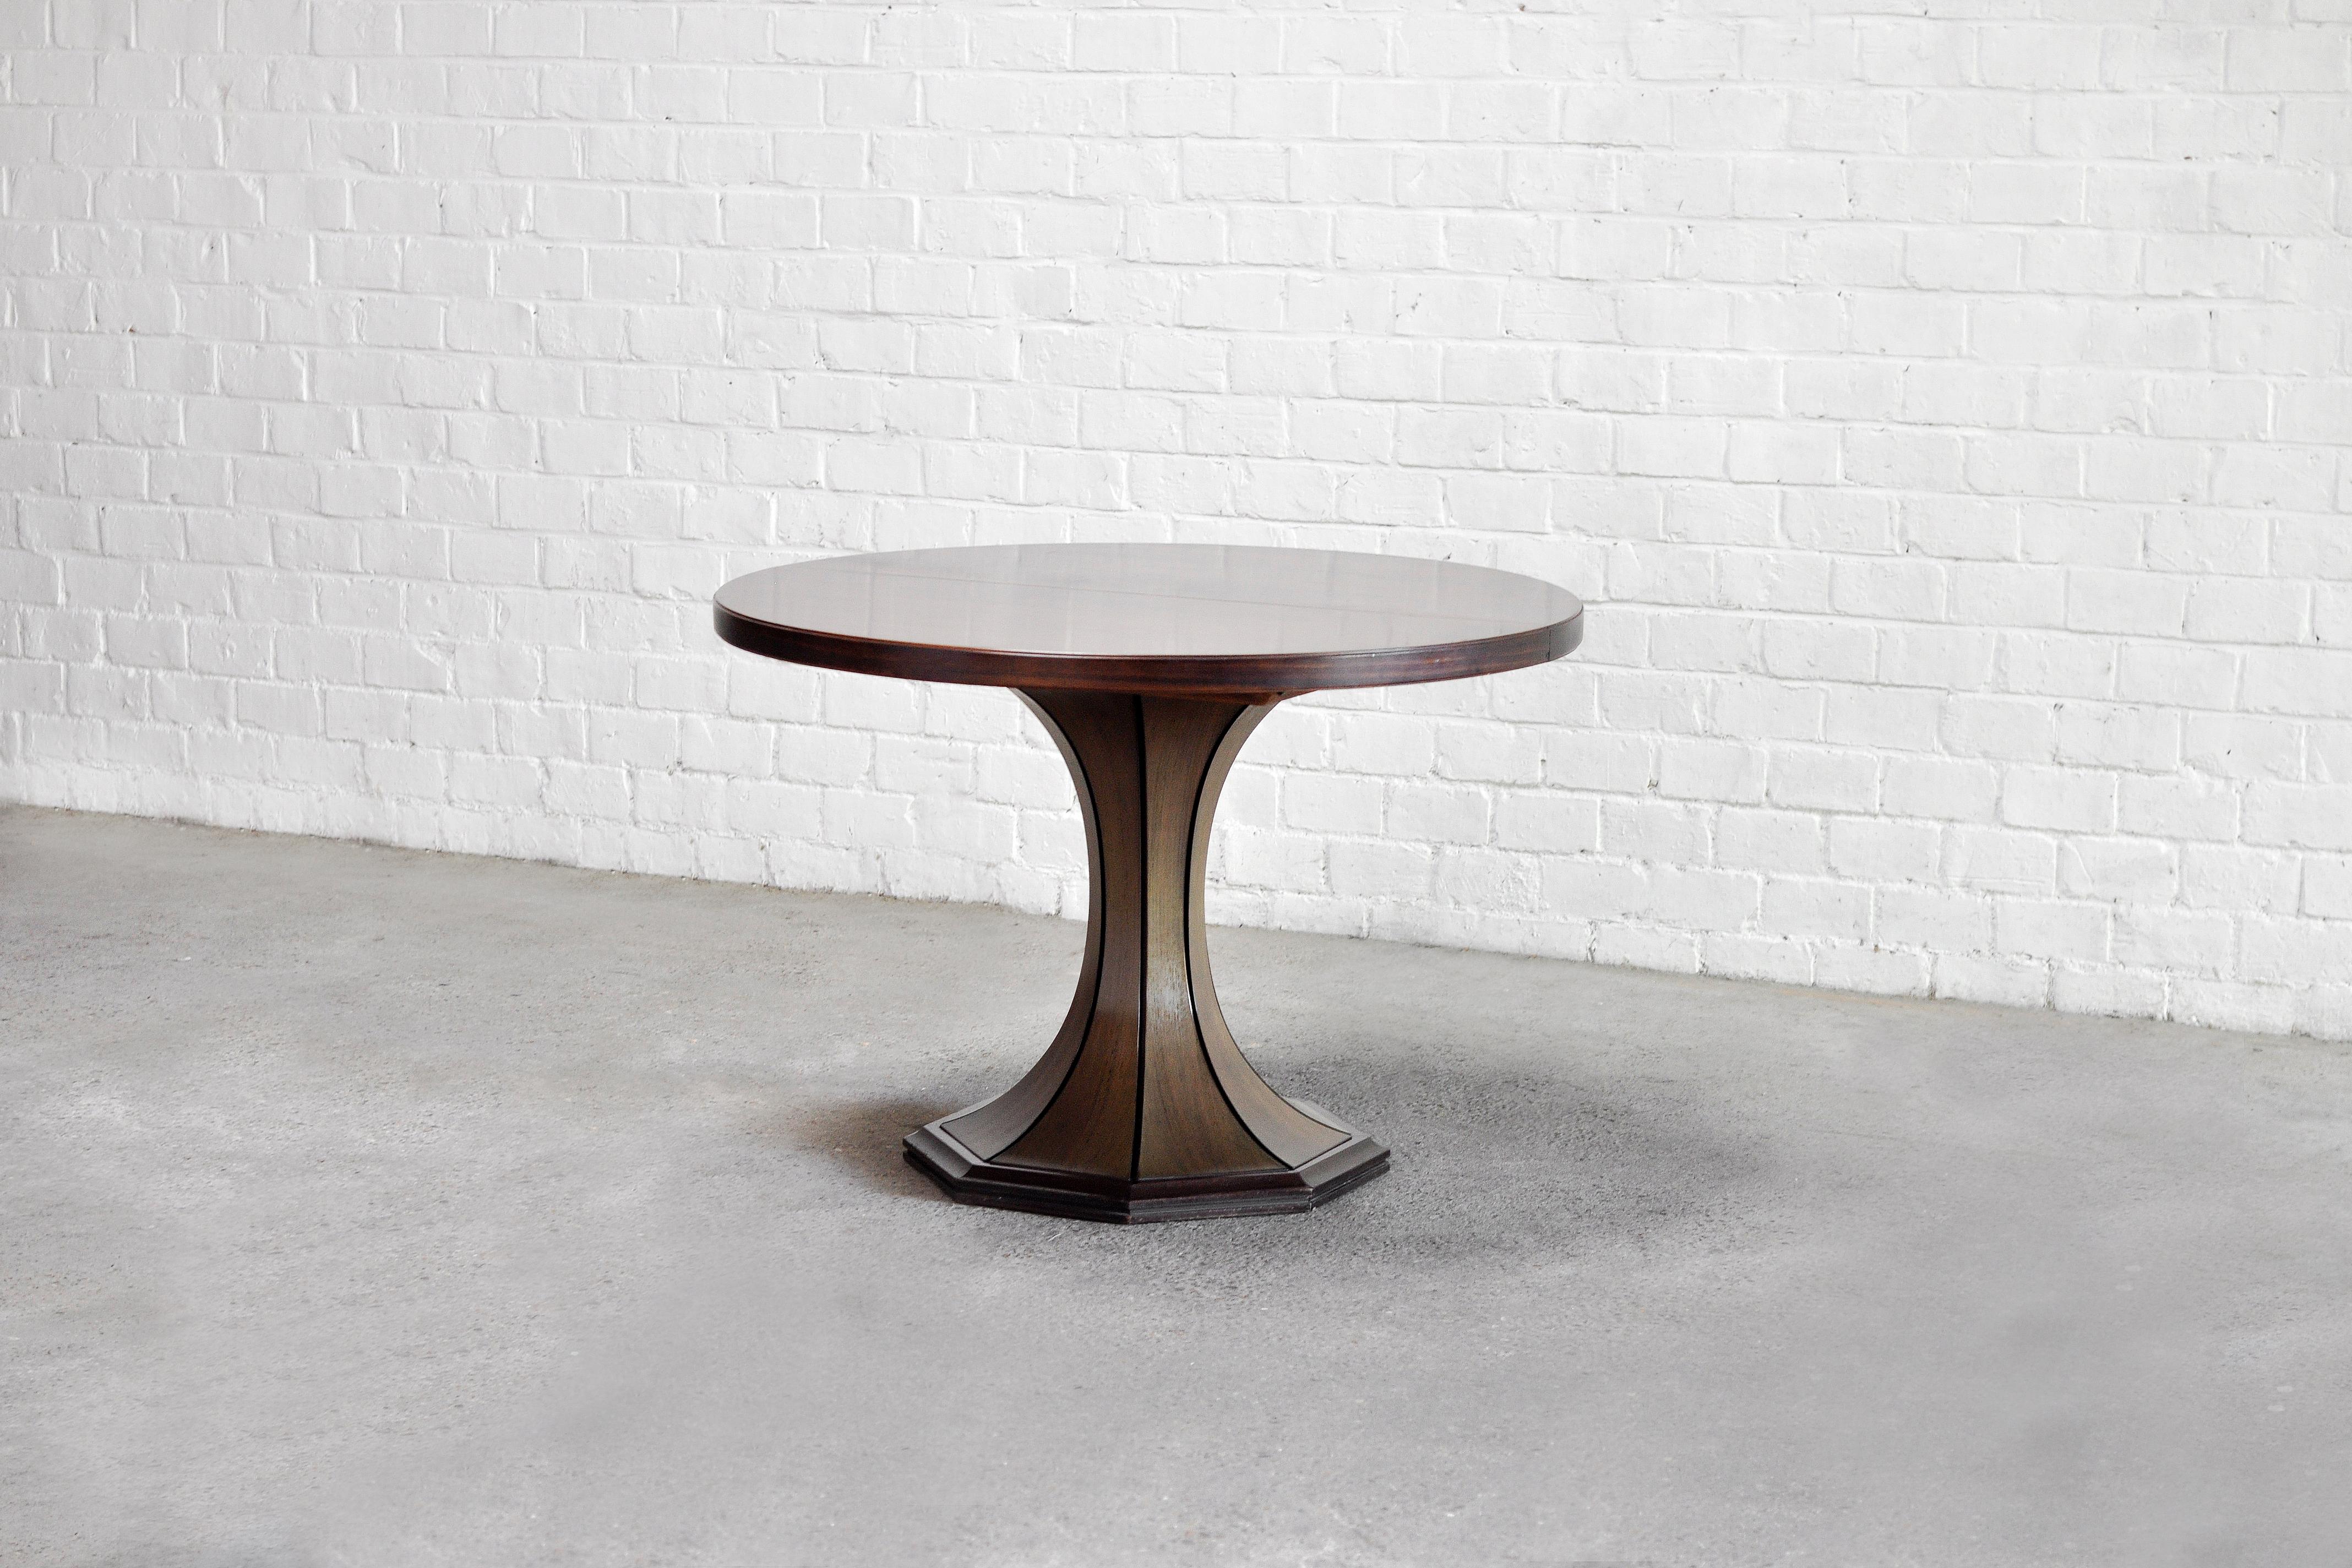 Italian Round Extendable Wooden Dining Table Attributed to Carlo de Carli, Italy 1960s